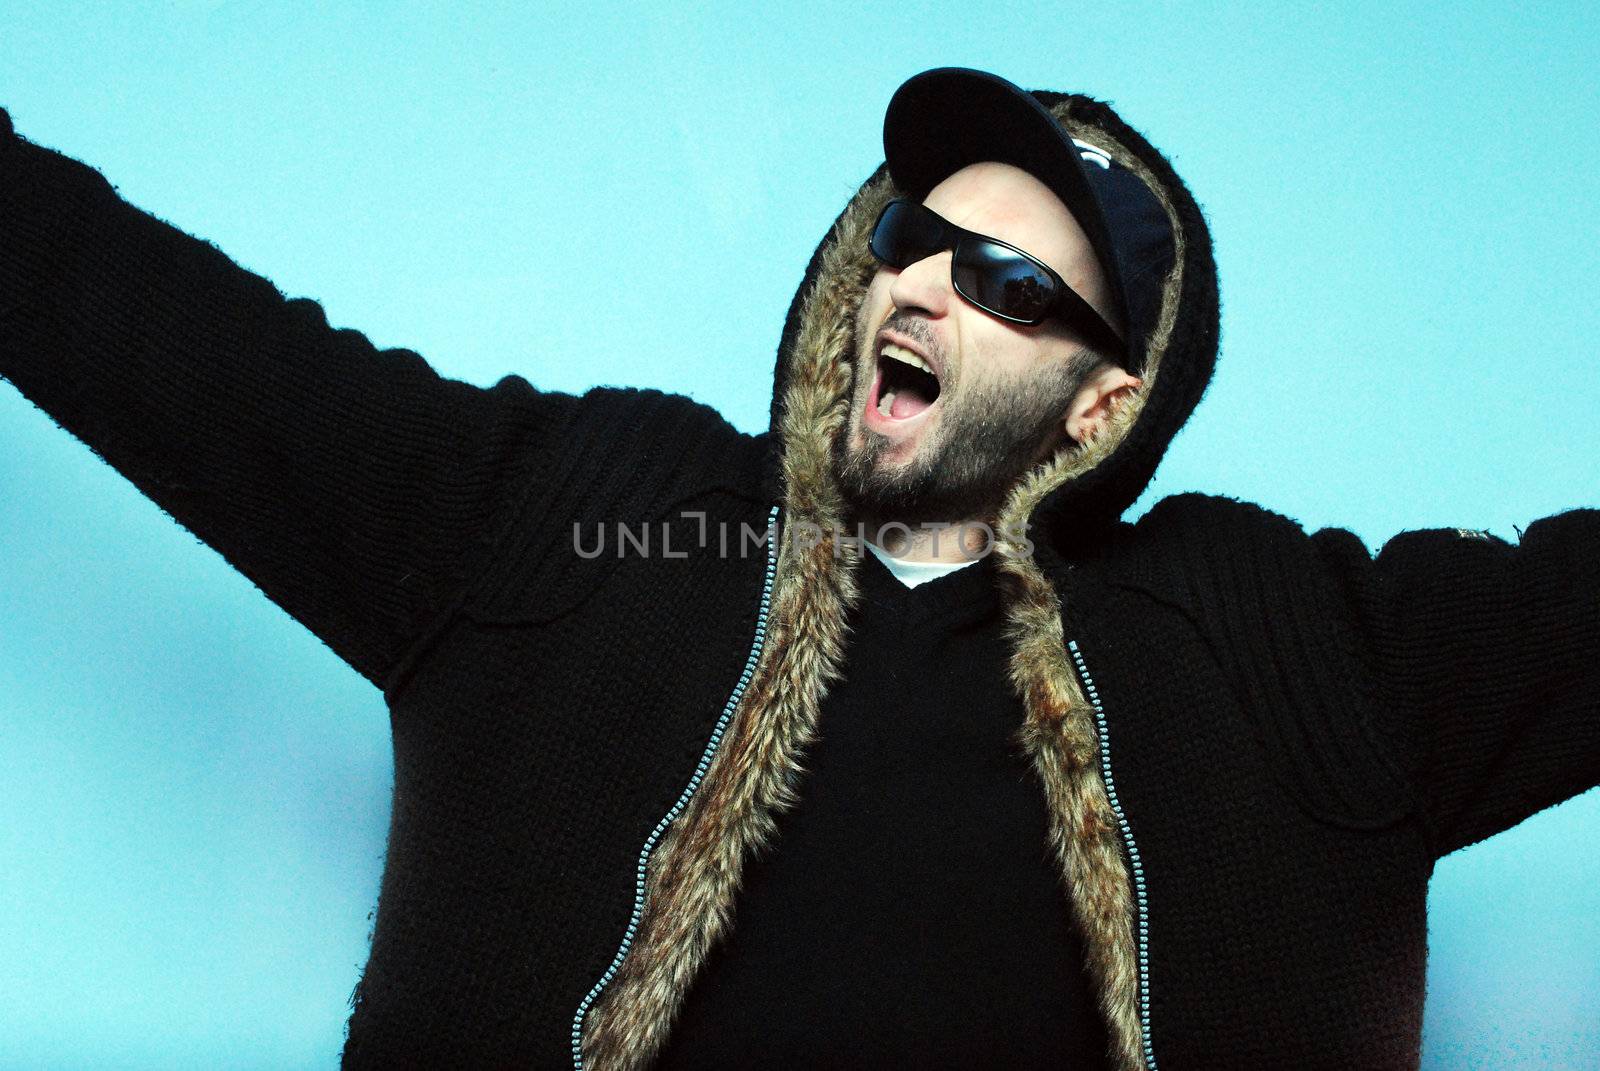 Angry man screaming with hip hop apearance on blue background 